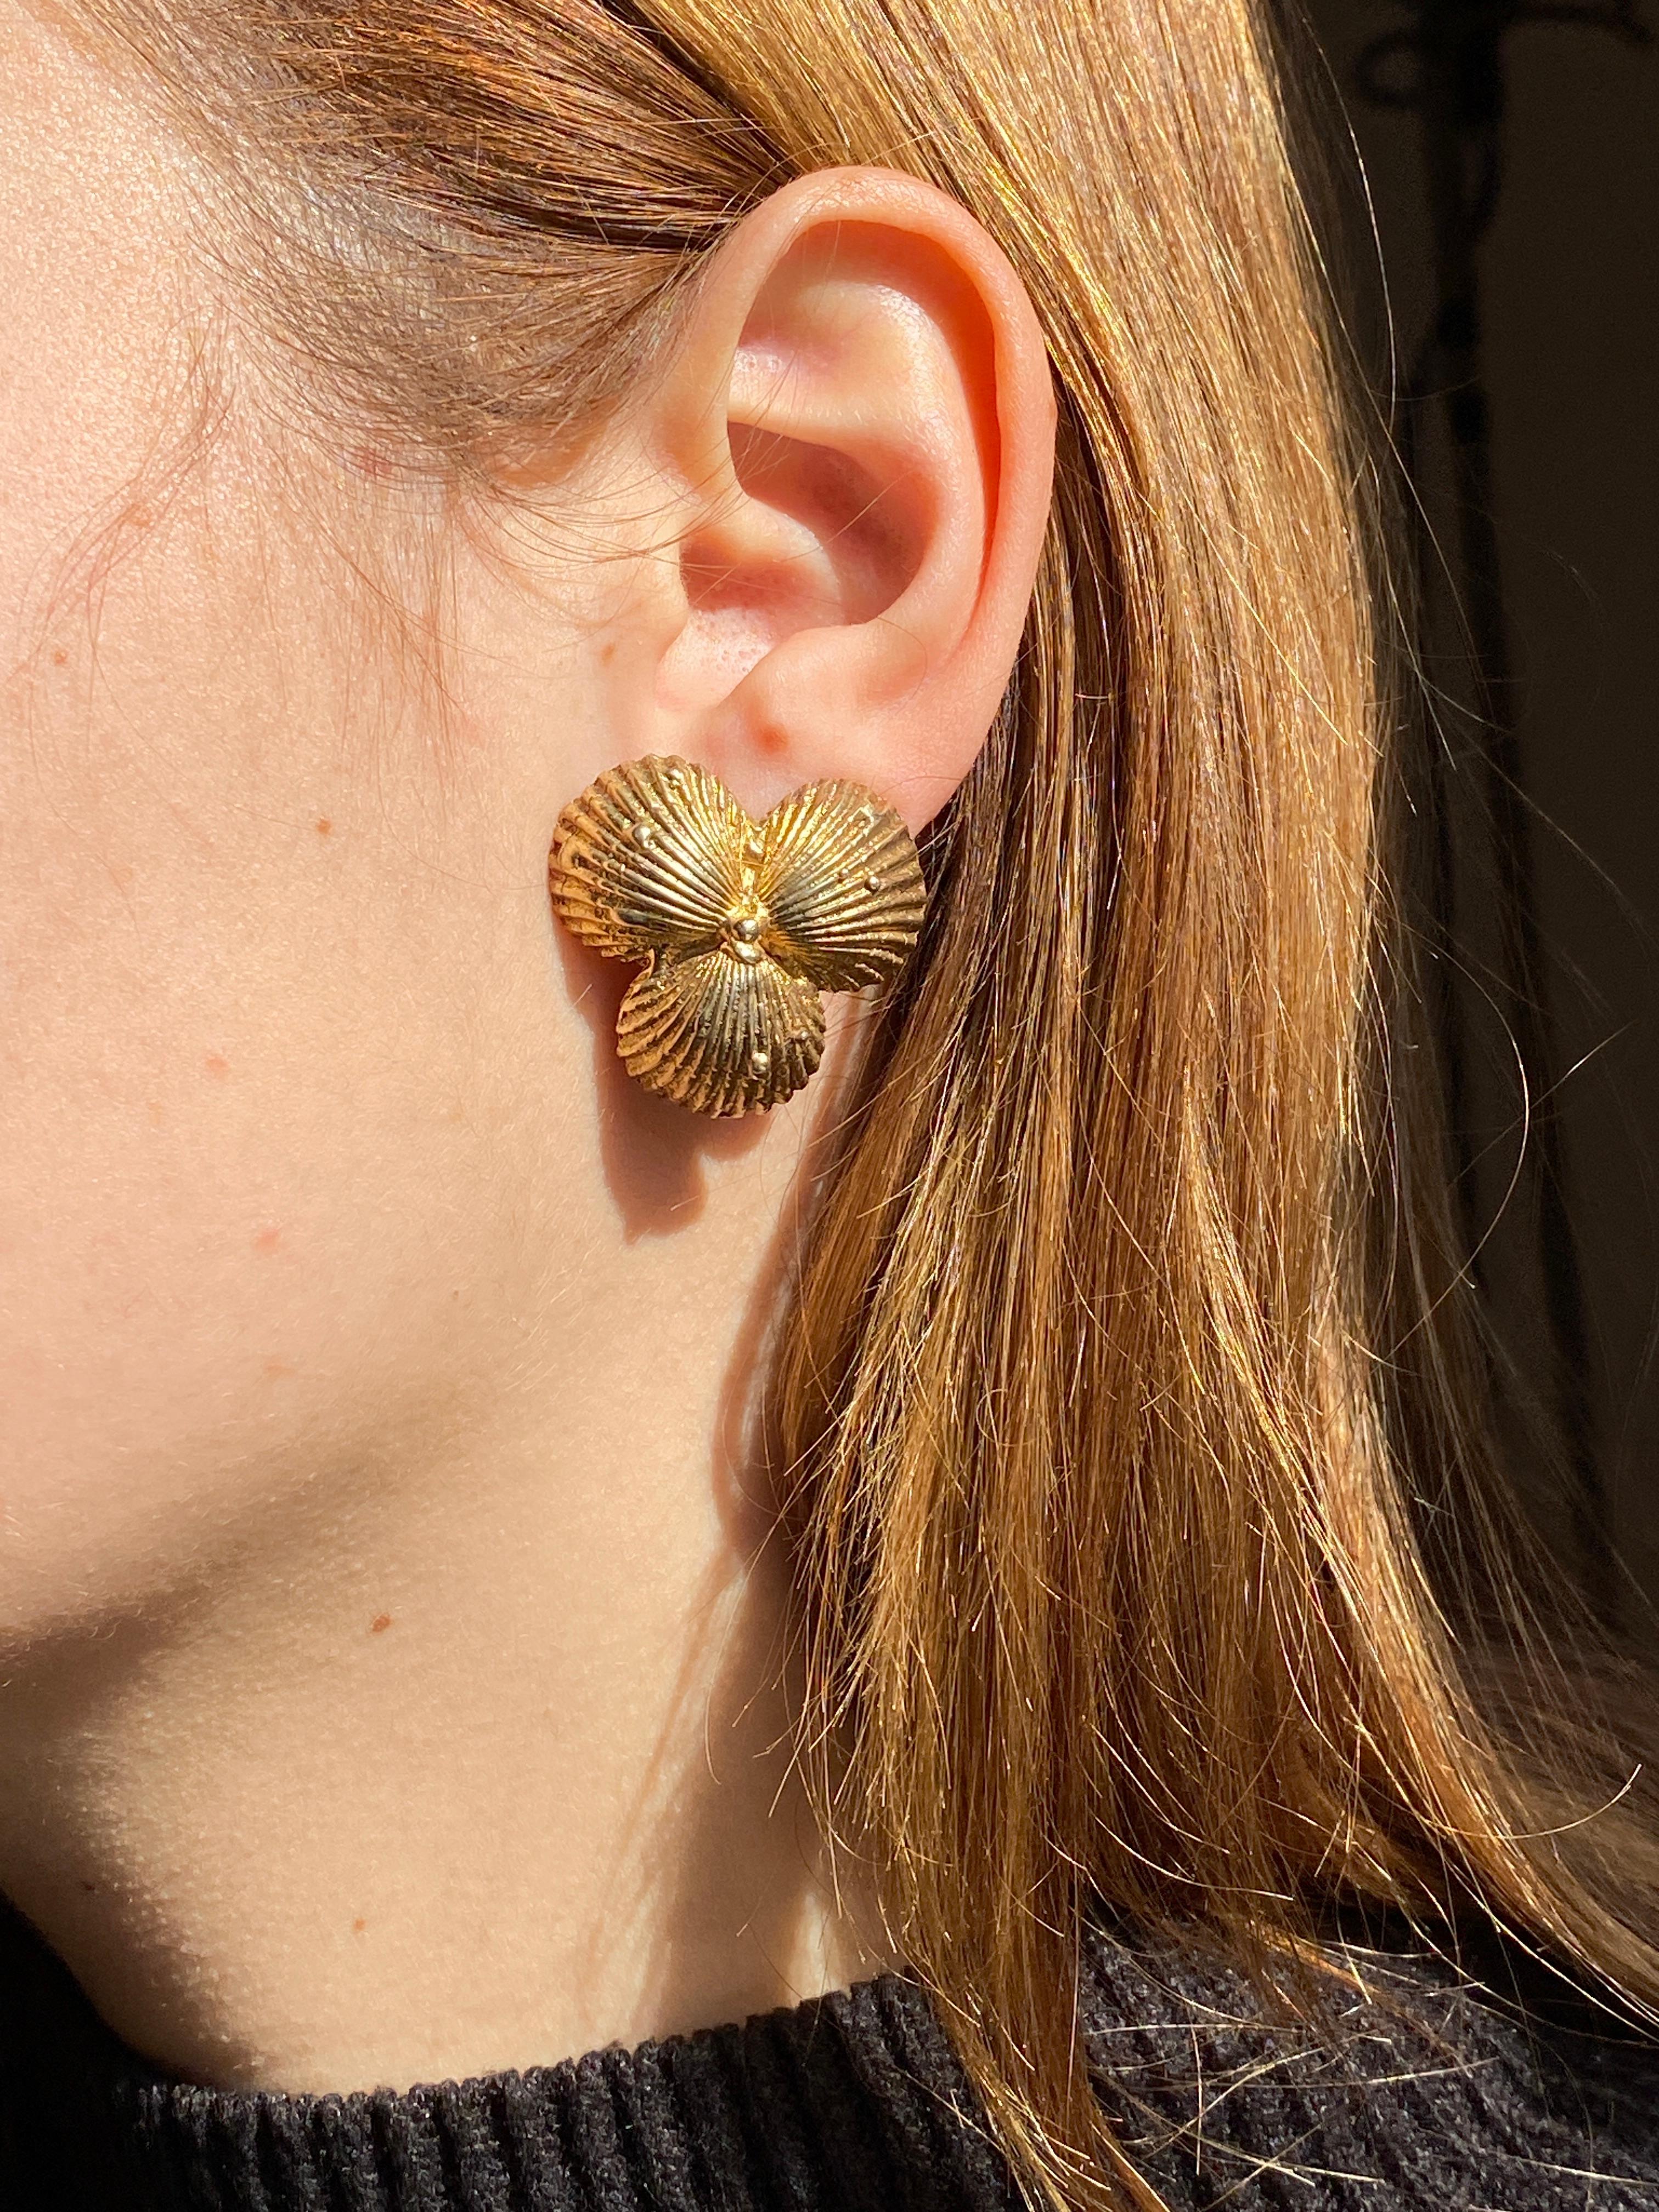 Introducing the Rossella Ugolini Design Collection, these 14Karat Yellow Gold Shell Shape Stud Earrings are meticulously handcrafted to embody the essence of artisanal excellence. Featuring three intricately designed shells, these earrings offer a